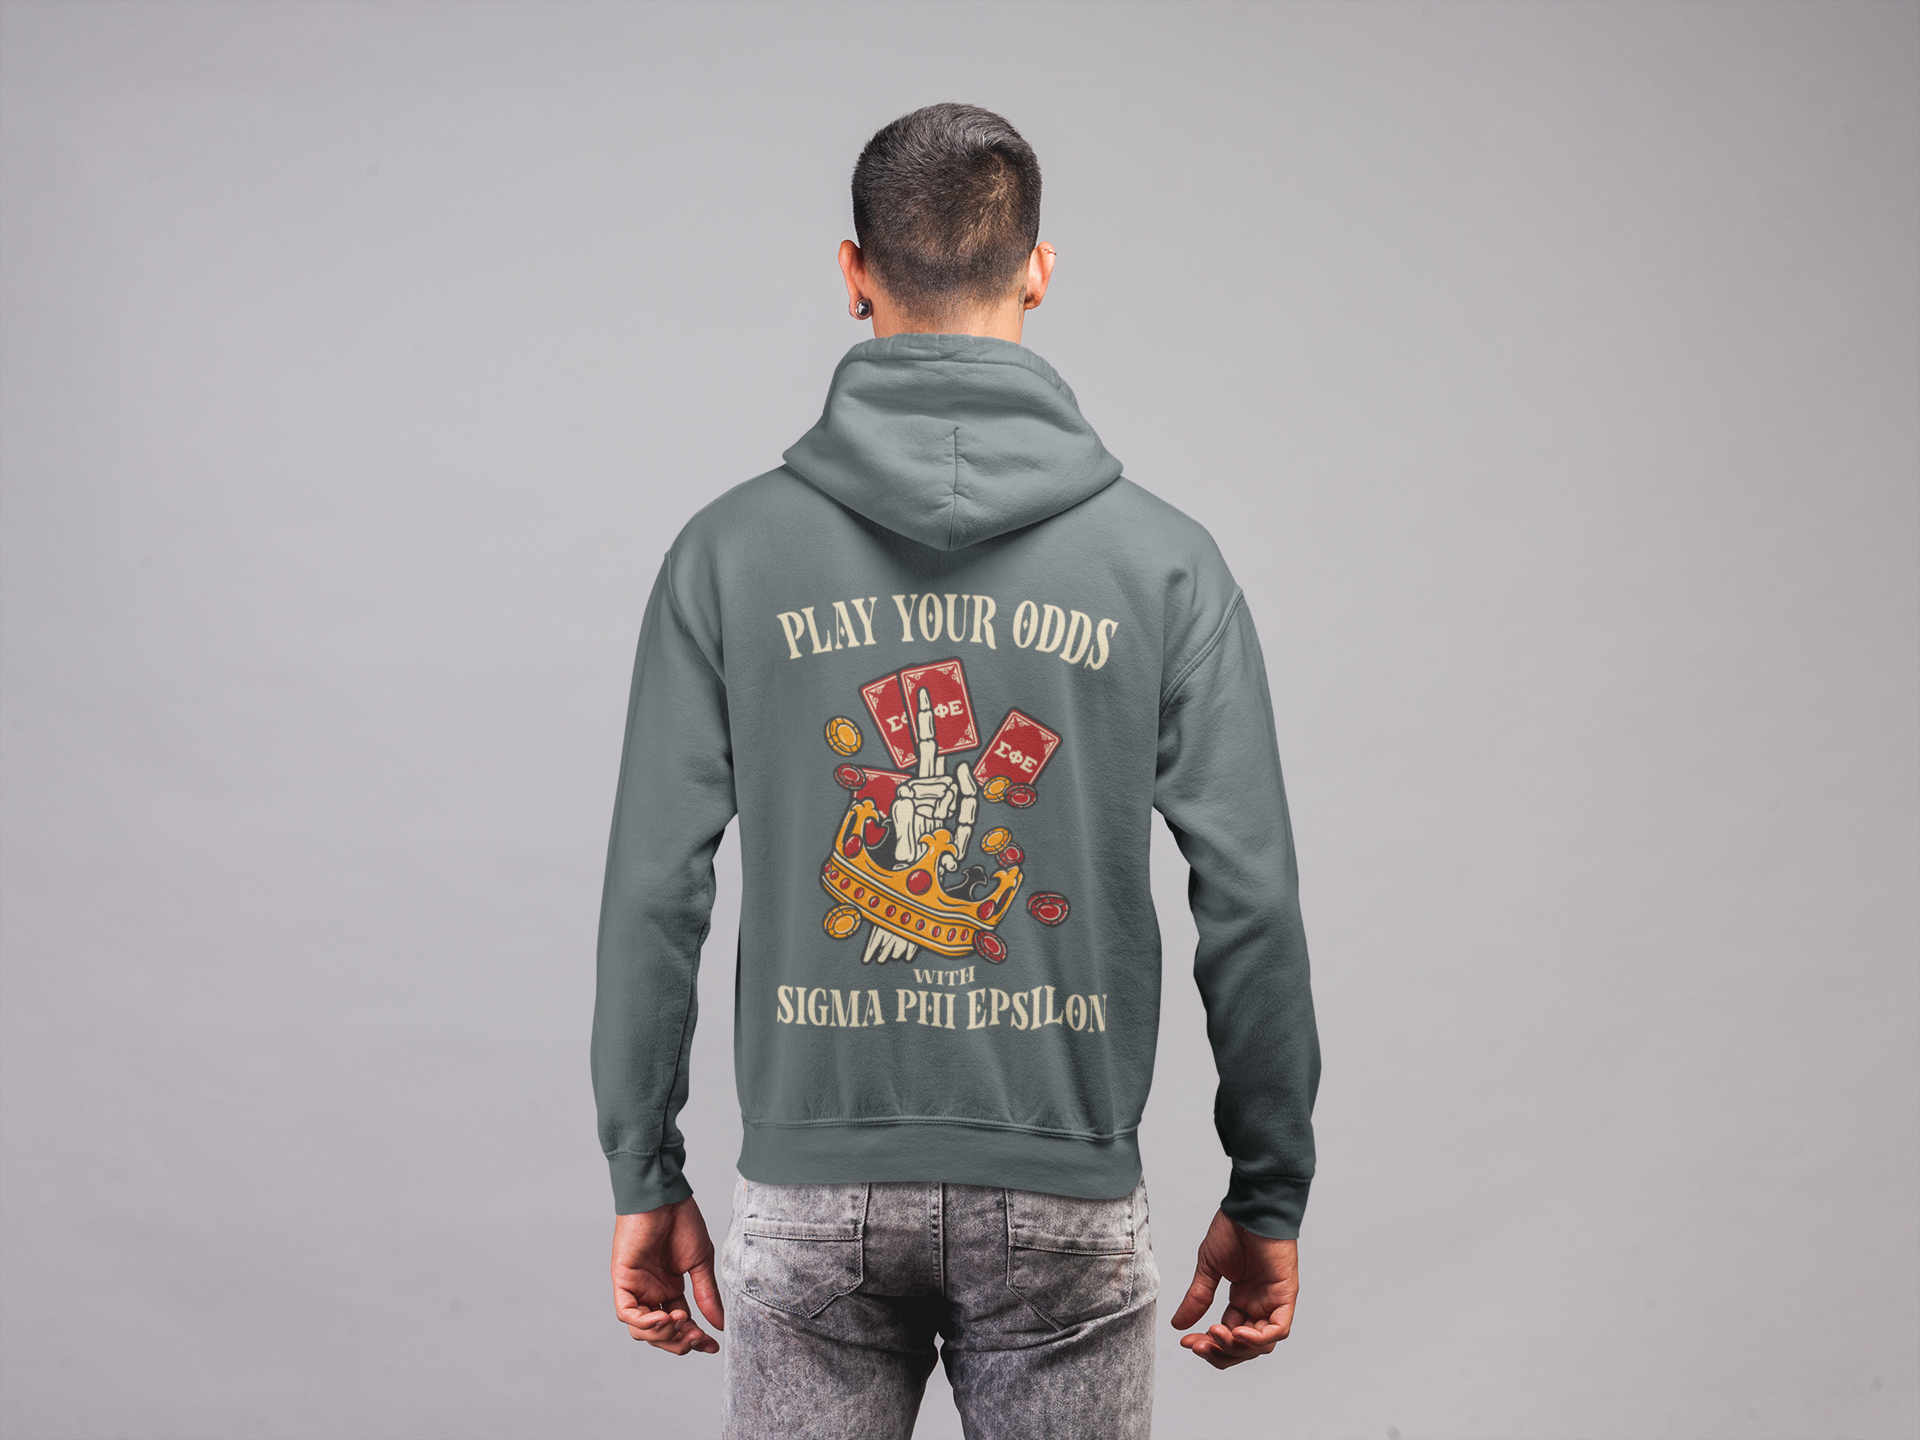 Sigma Phi Epsilon Graphic Hoodie | Play Your Odds | SigEp Clothing - Campus Apparel model 